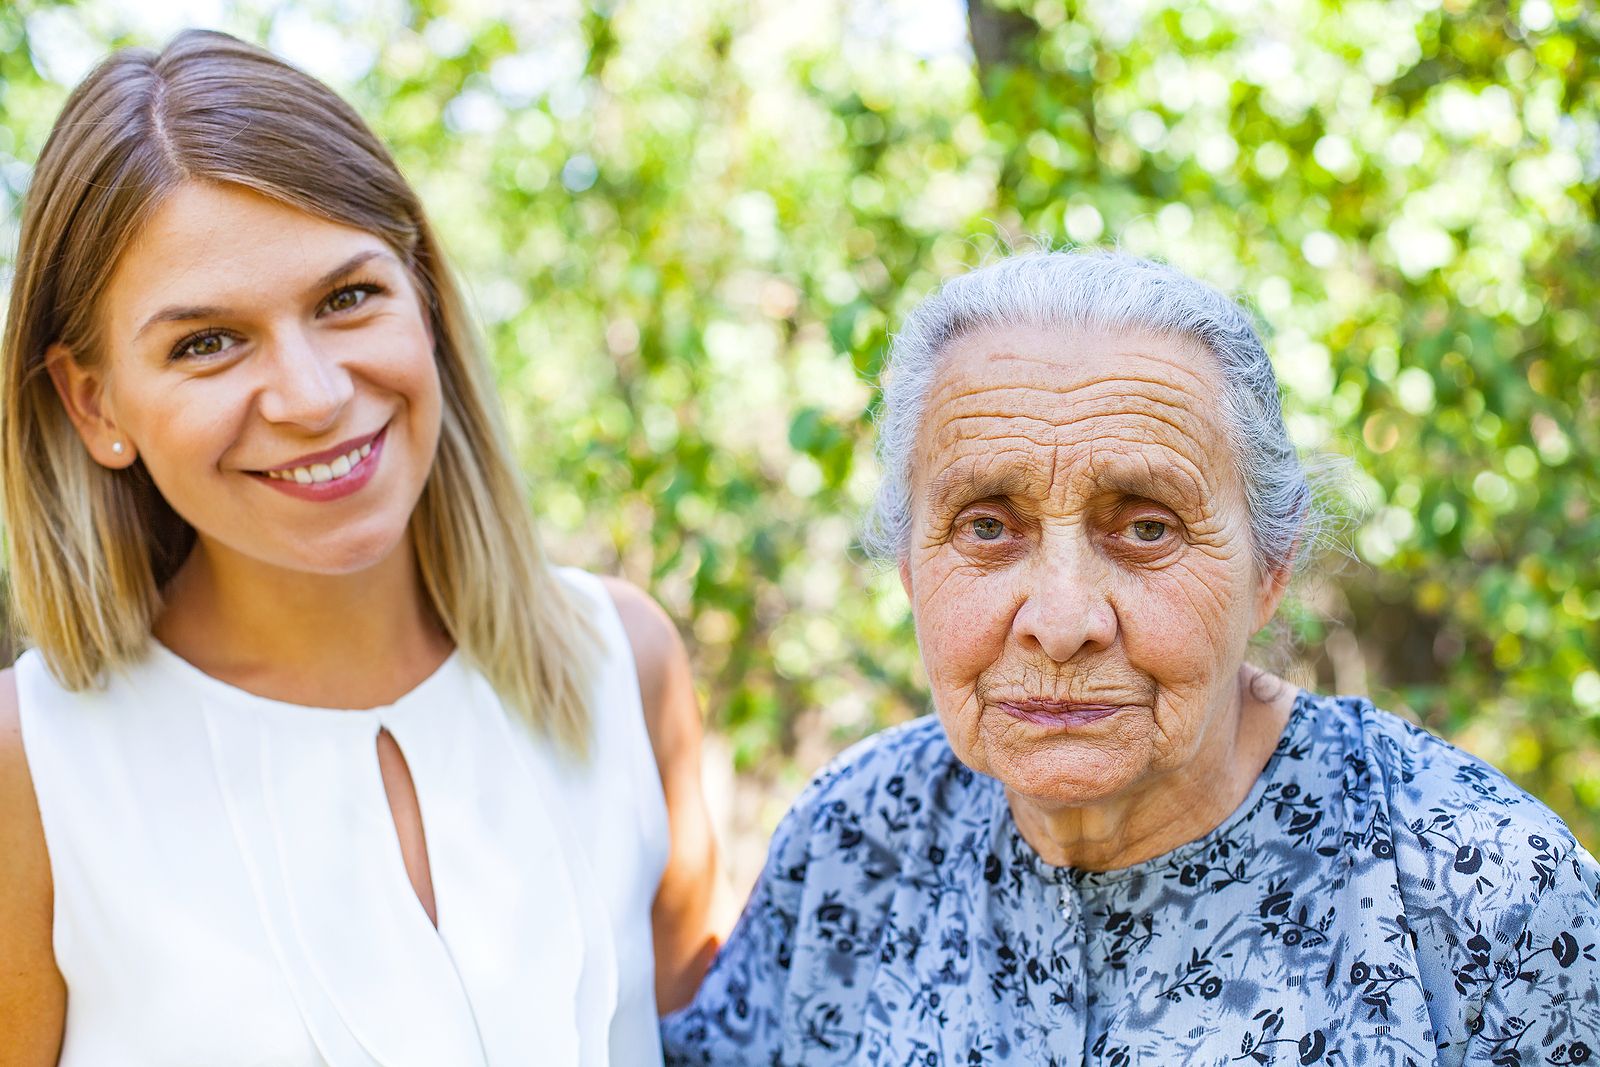 Visiting Loved Ones With Dementia In A Community